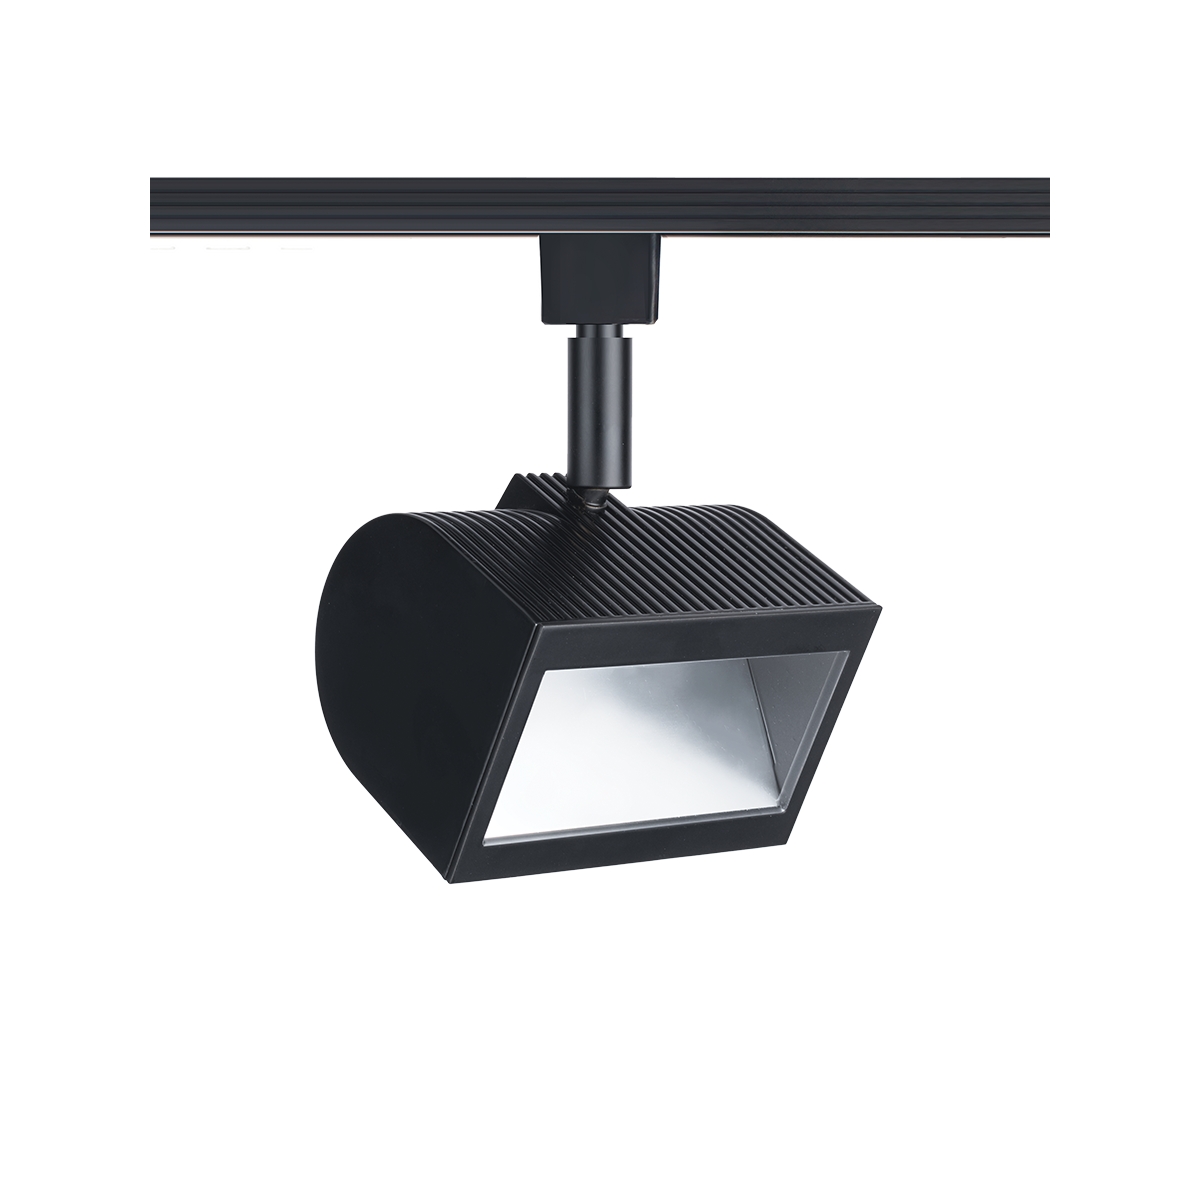 WAC Lighting H-3020W-30-BK LED3020 Wall Wash Head in Black for H Track - 5